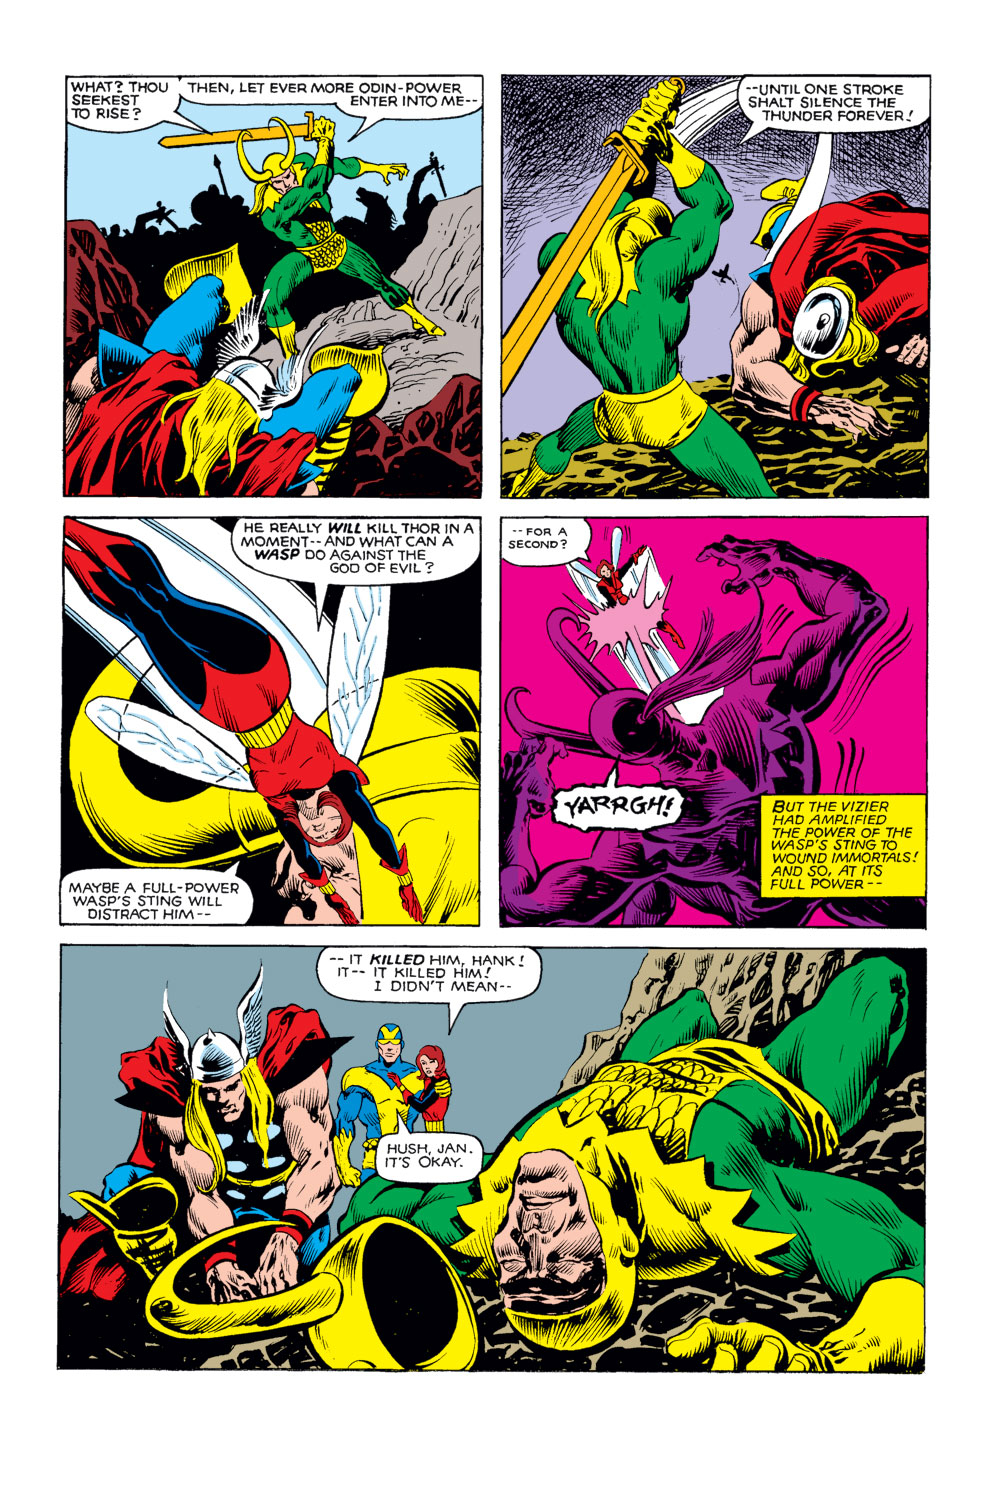 What If? (1977) issue 25 - Thor and the Avengers battled the gods - Page 27